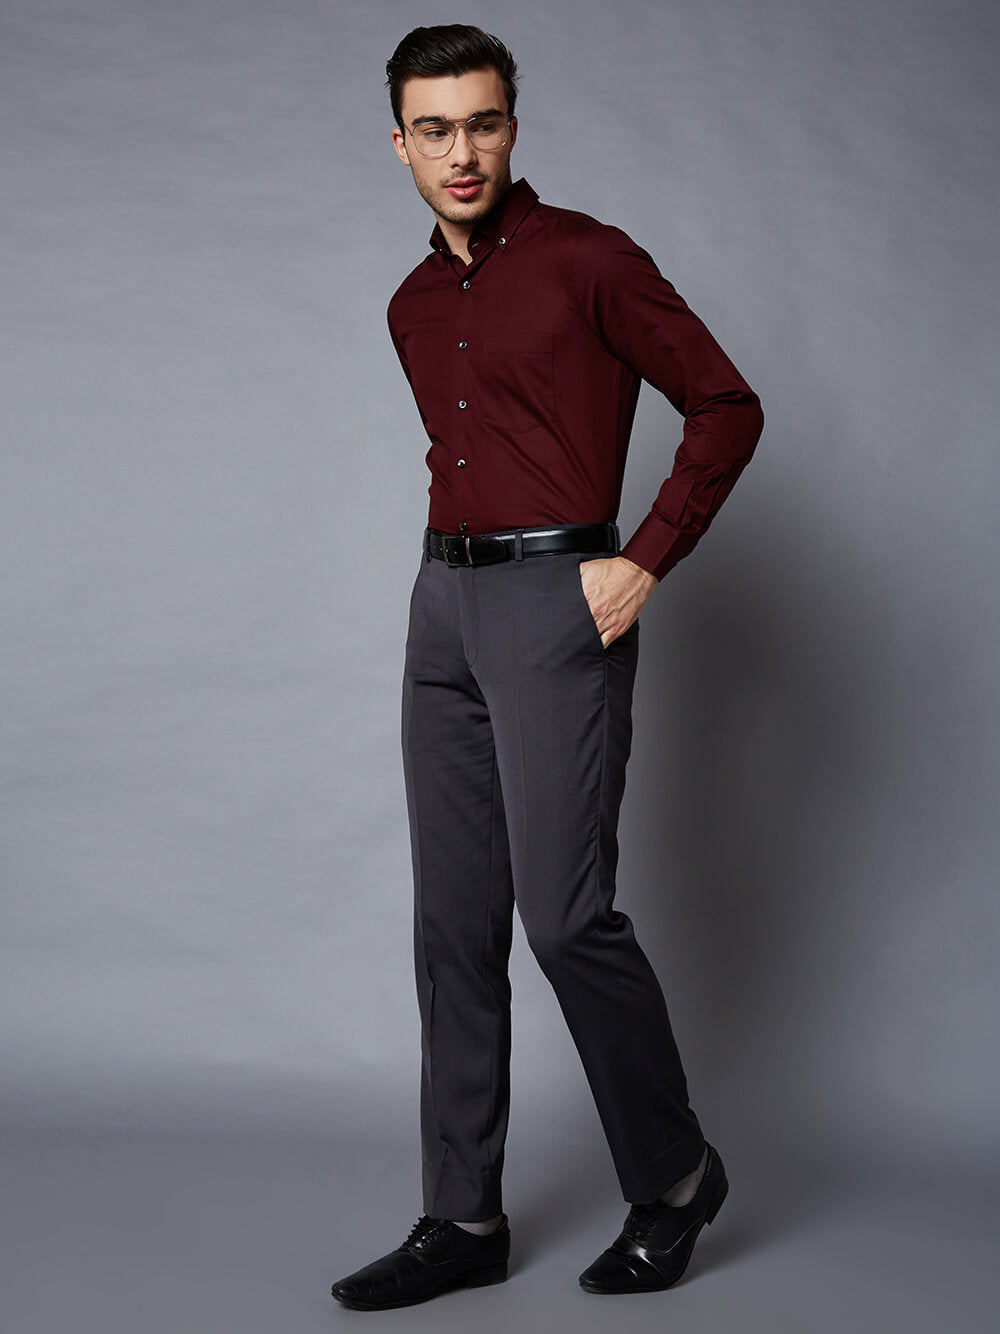 What color of pants should I wear with a red shirt? - Quora